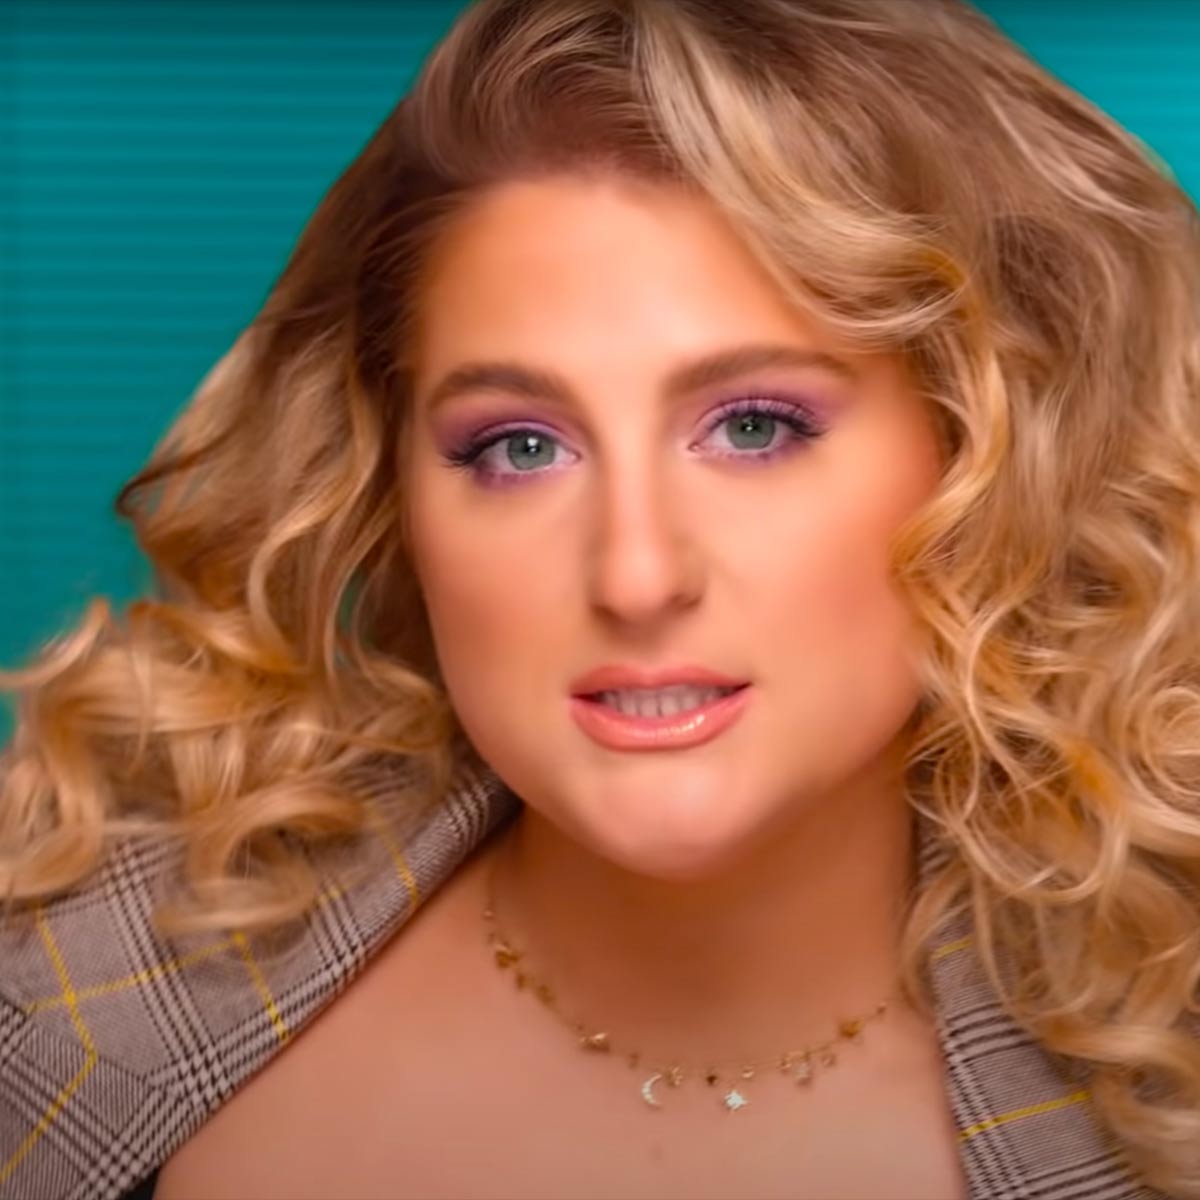 Made You Look (Meghan Trainor song) - Wikipedia